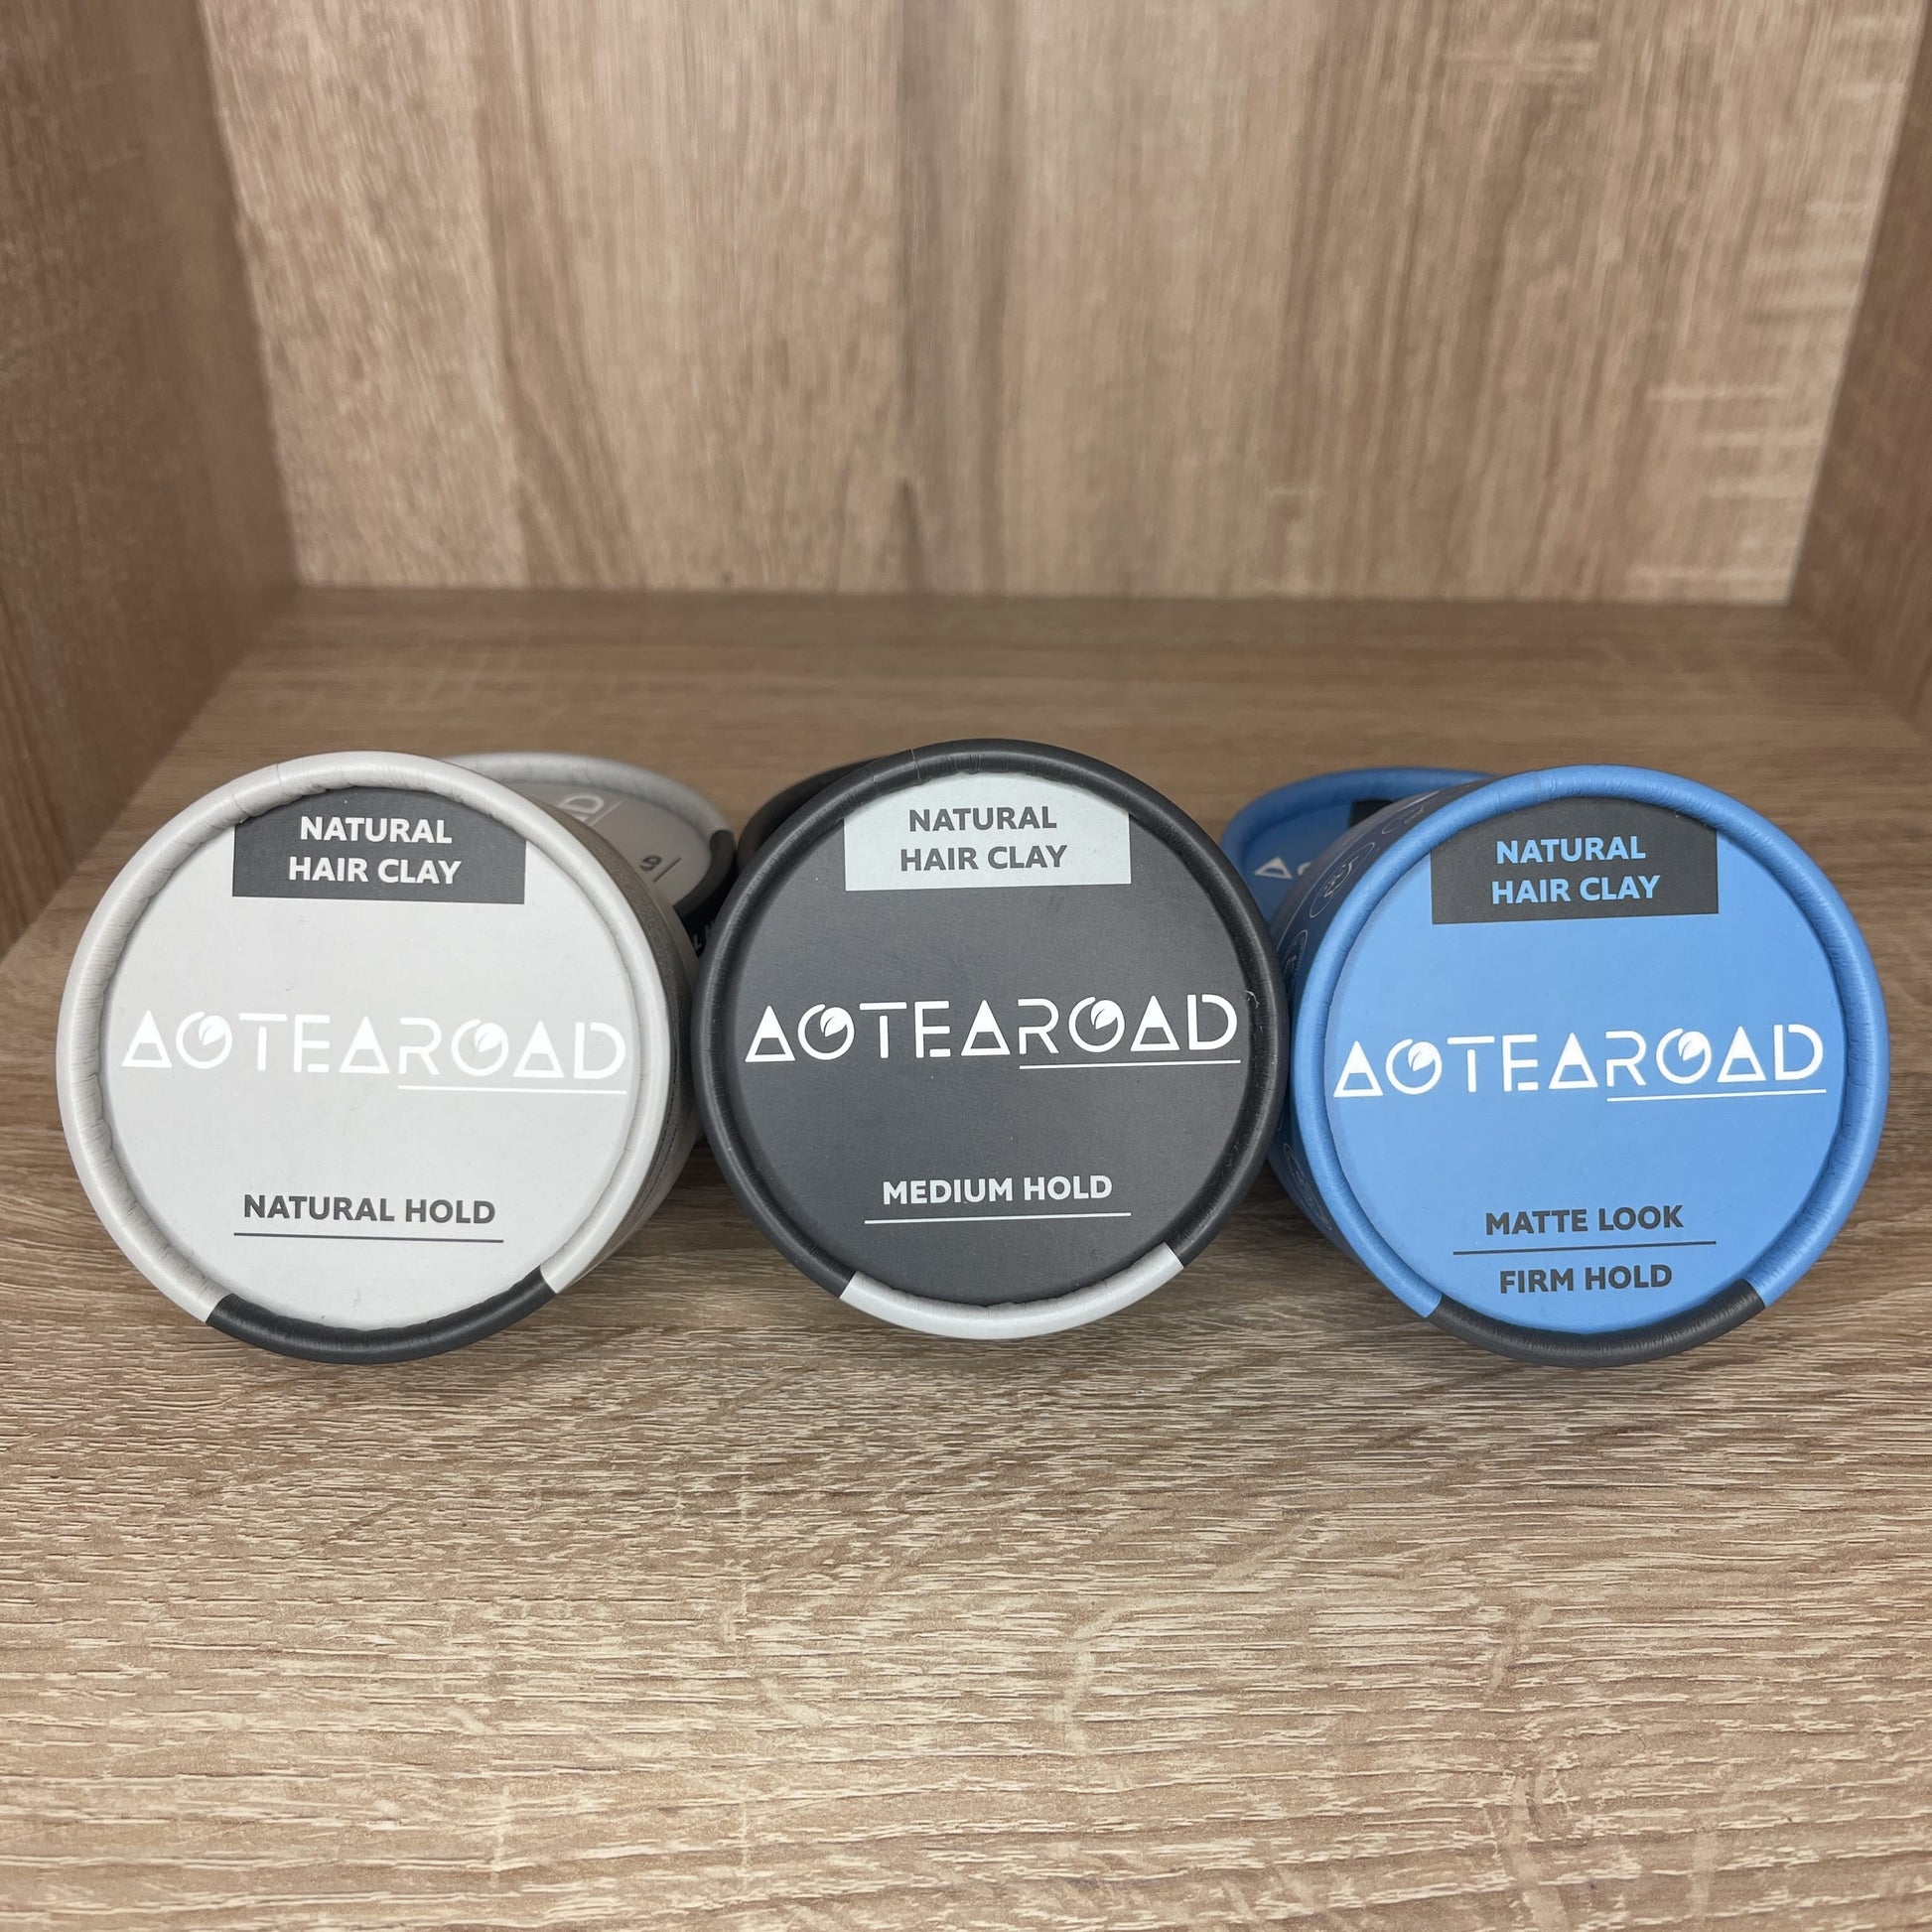 Assorted hair clay from Aotearoad.